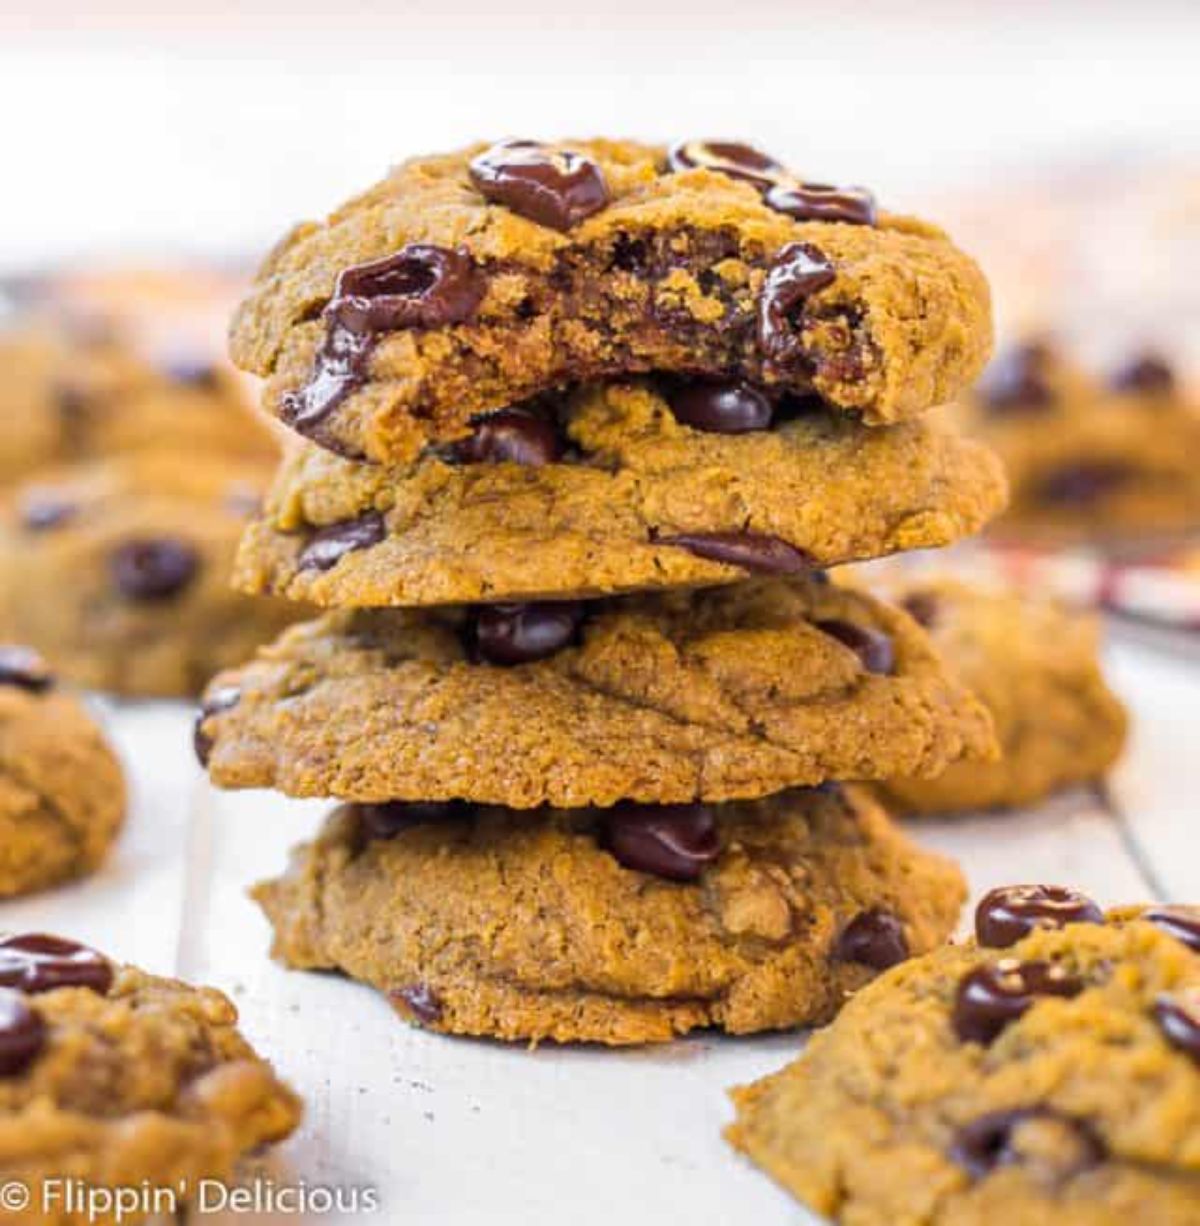 A pile of Gluten-Free Pumpkin Chocolate Chip Cookies on a wooden table.